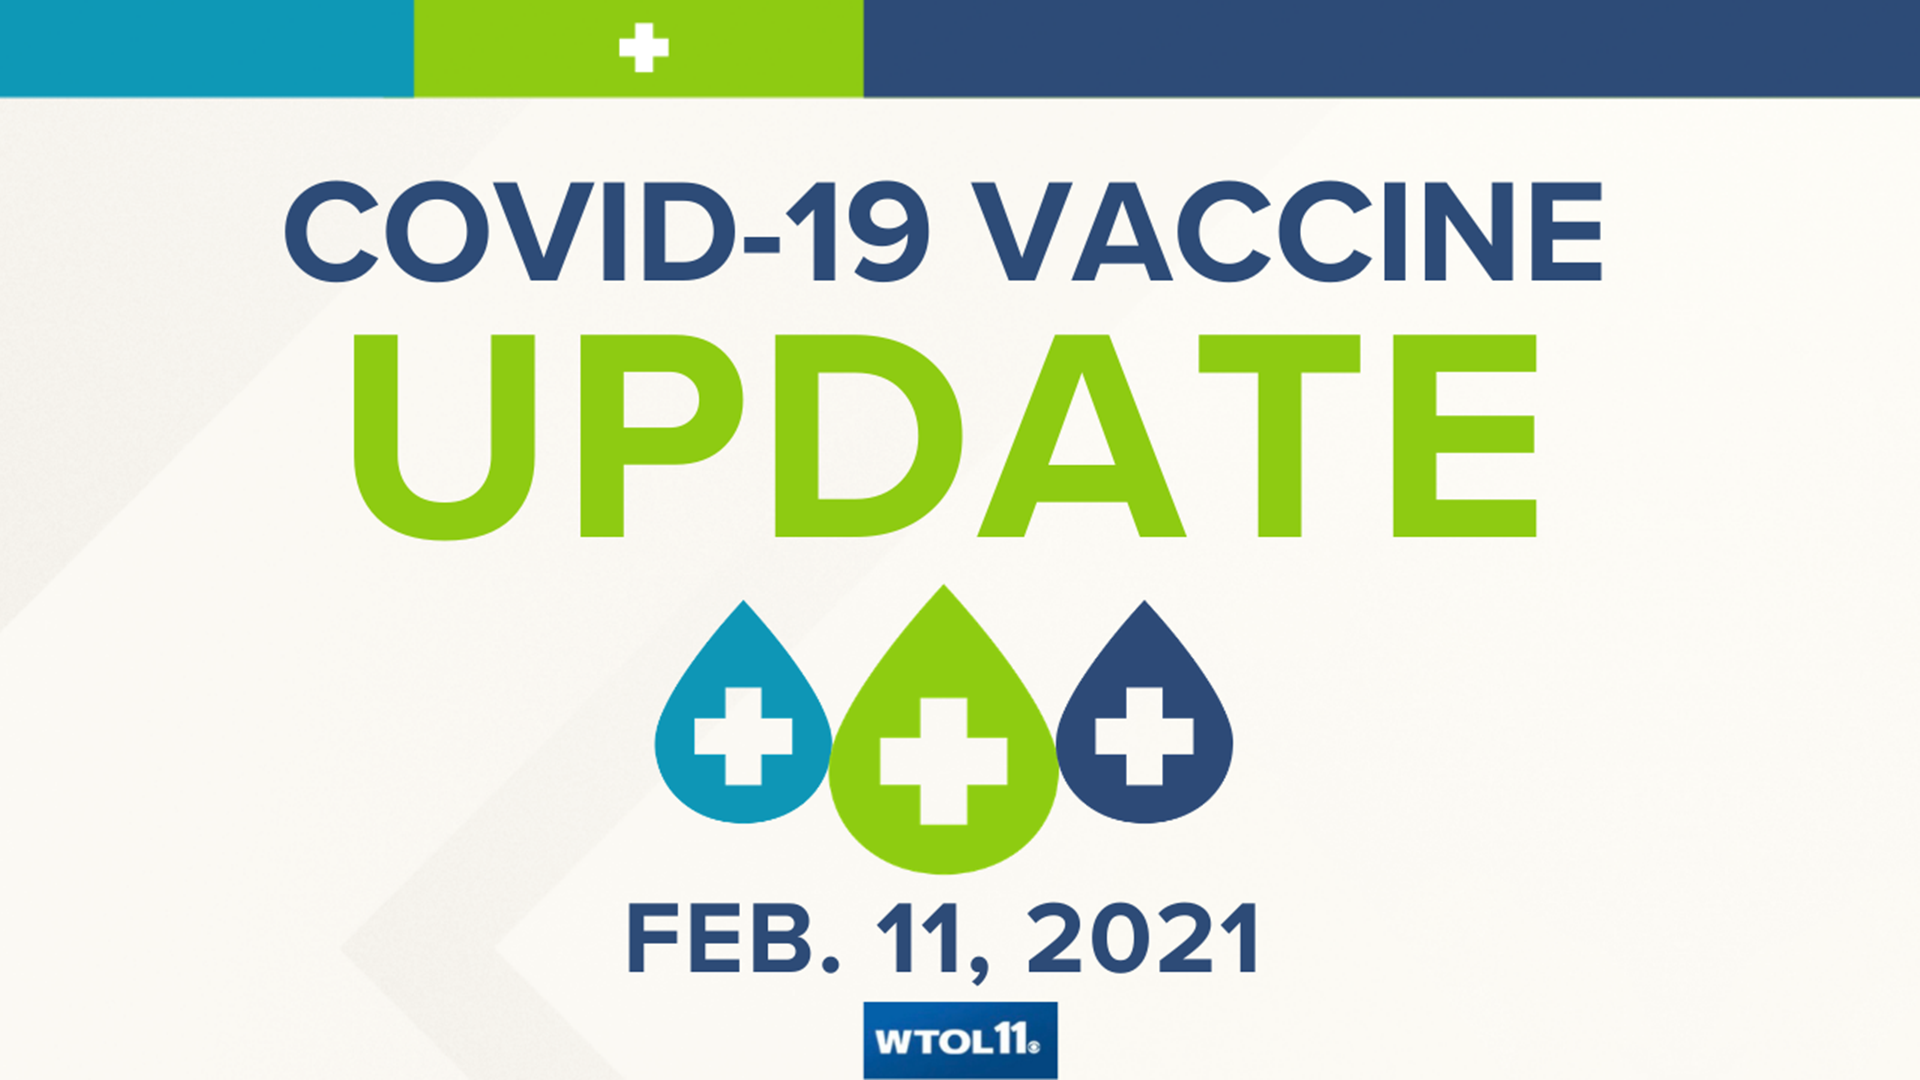 Next week, more doses will be available by several thousand, since the K-12 doses will have been accounted for. The 1B category will continue for several weeks.